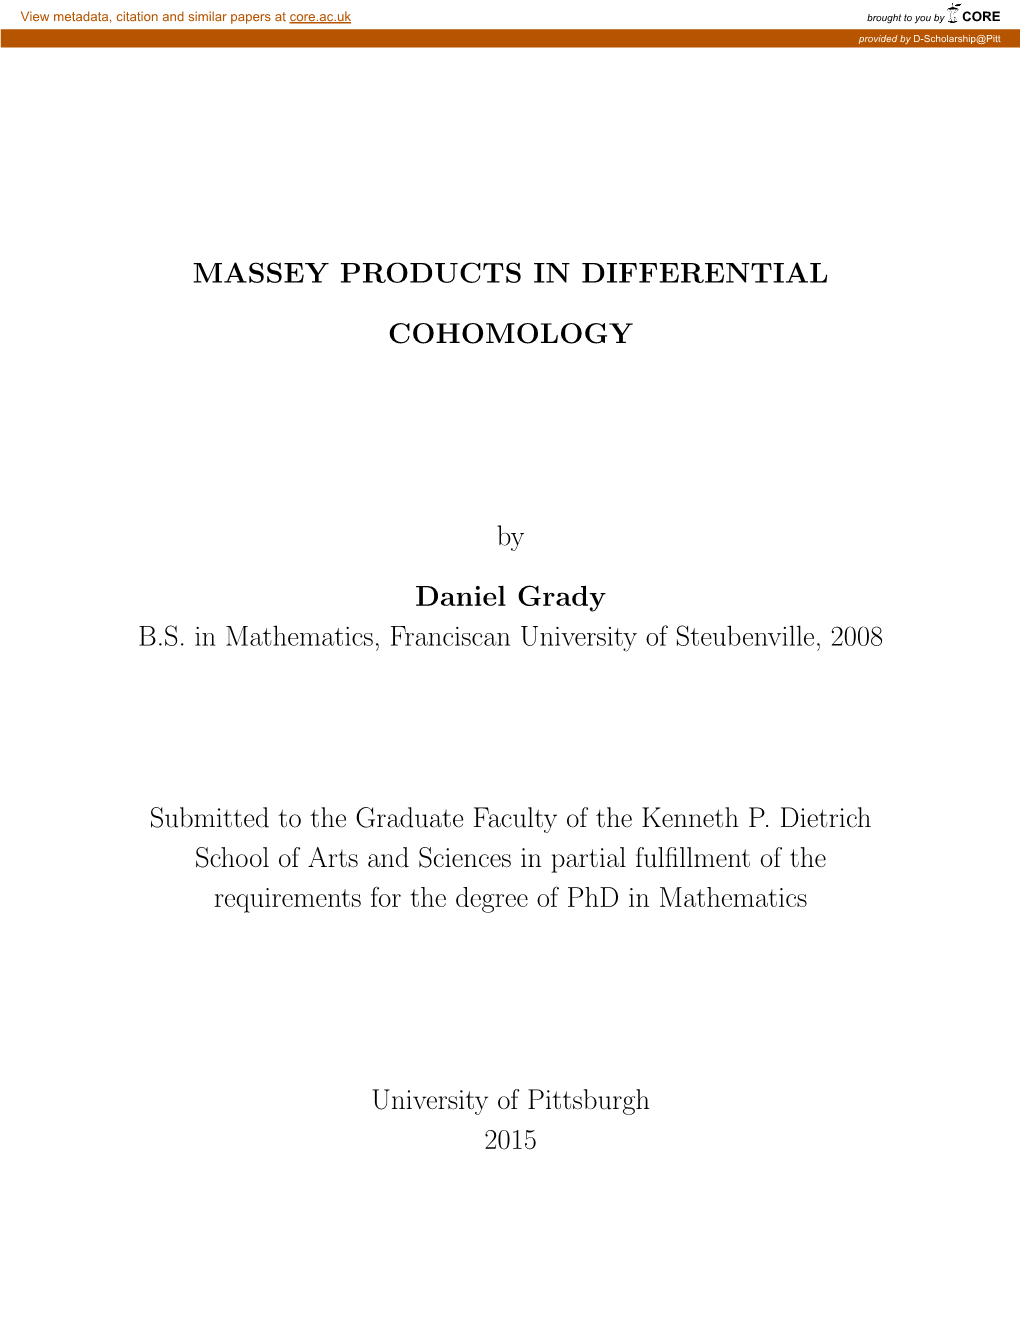 MASSEY PRODUCTS in DIFFERENTIAL COHOMOLOGY Daniel Grady, Phd University of Pittsburgh, 2015